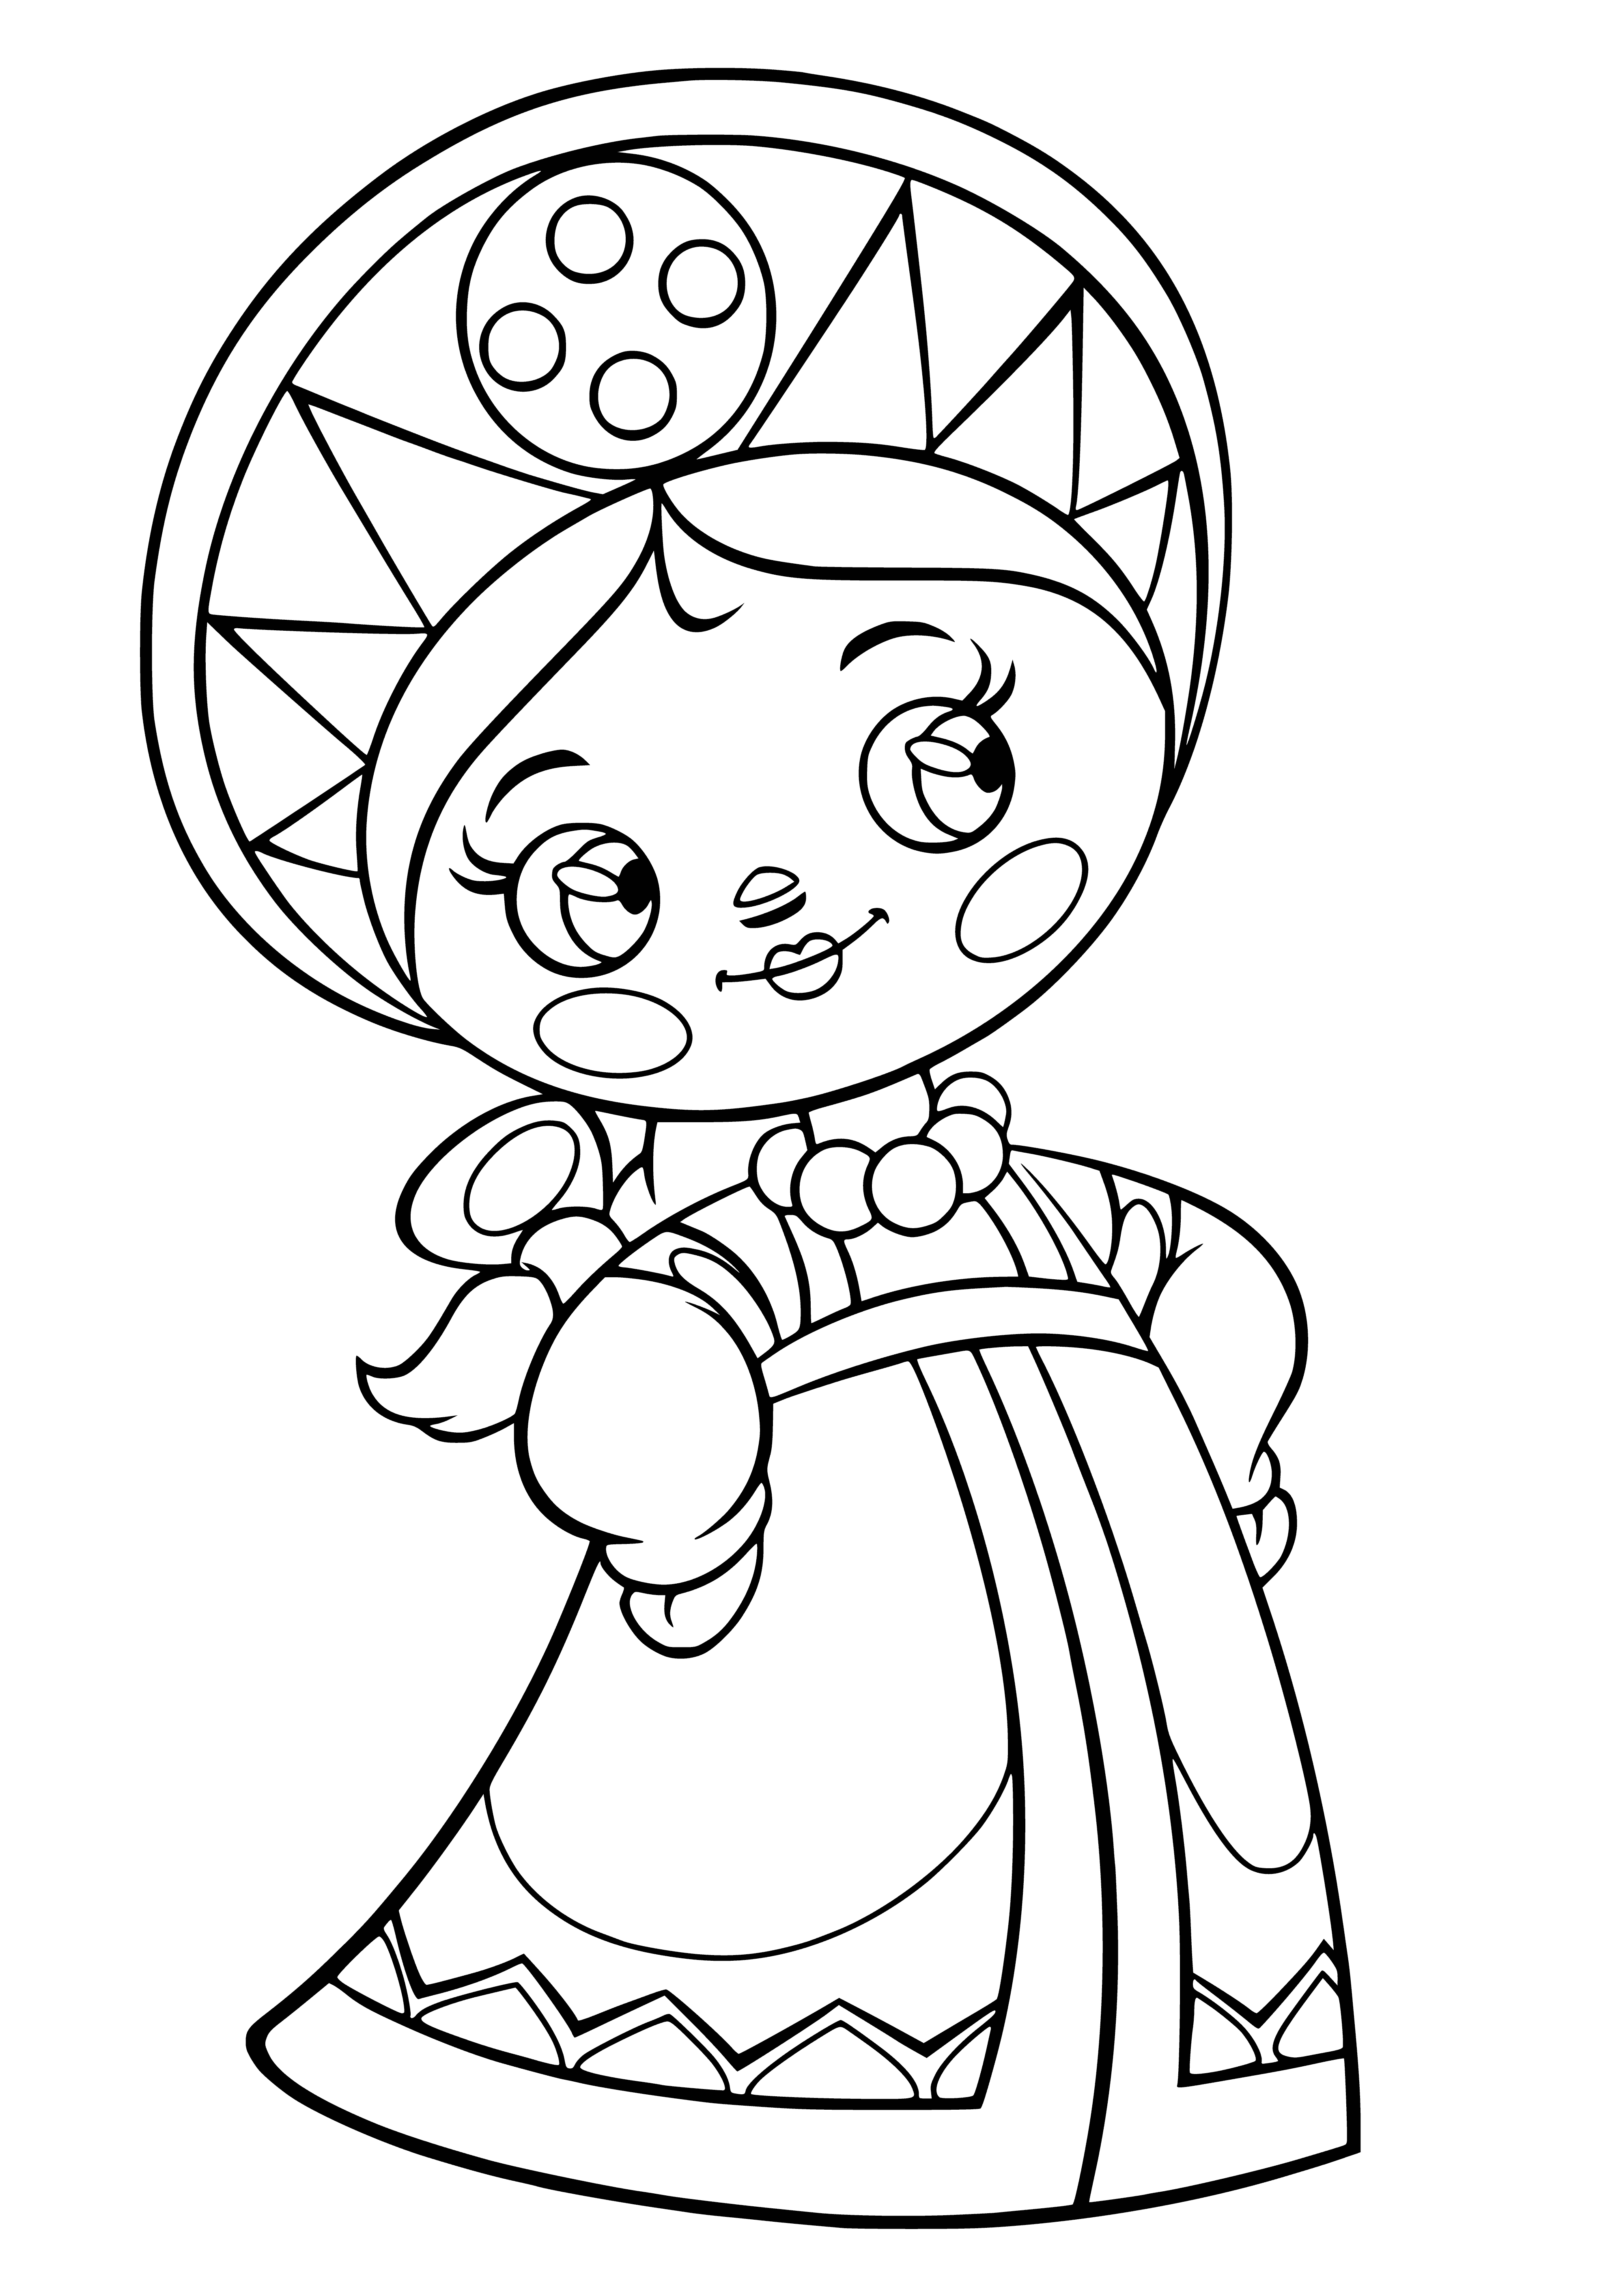 coloring page: Vovka is a carefree pup who loves to explore and meet new friends, loves getting belly rubs and curling up for nap time.